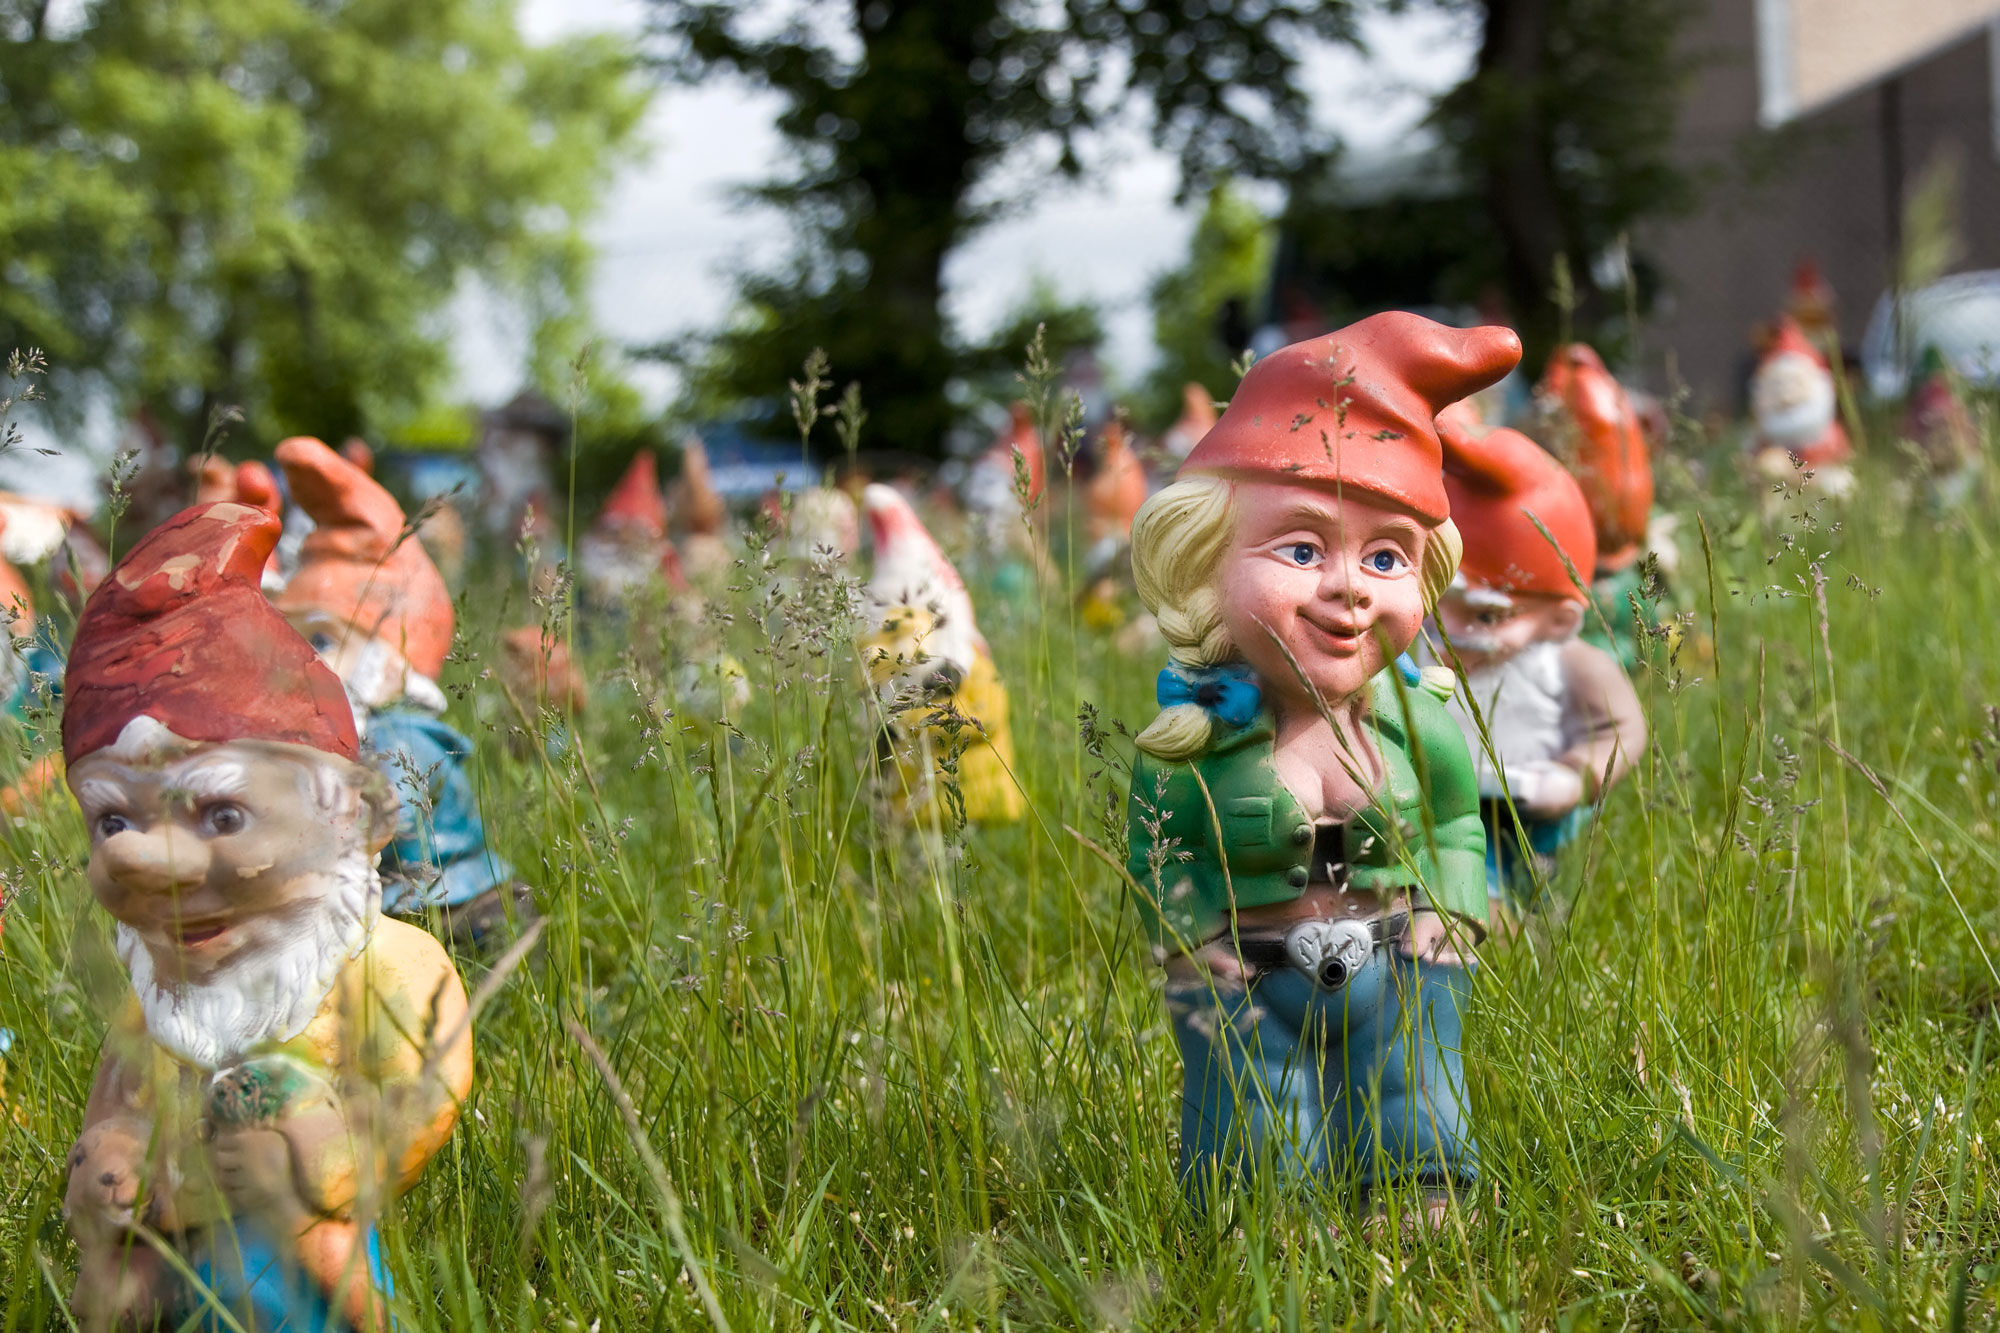 Lots of gnomes, somewhere in Wisconsin.